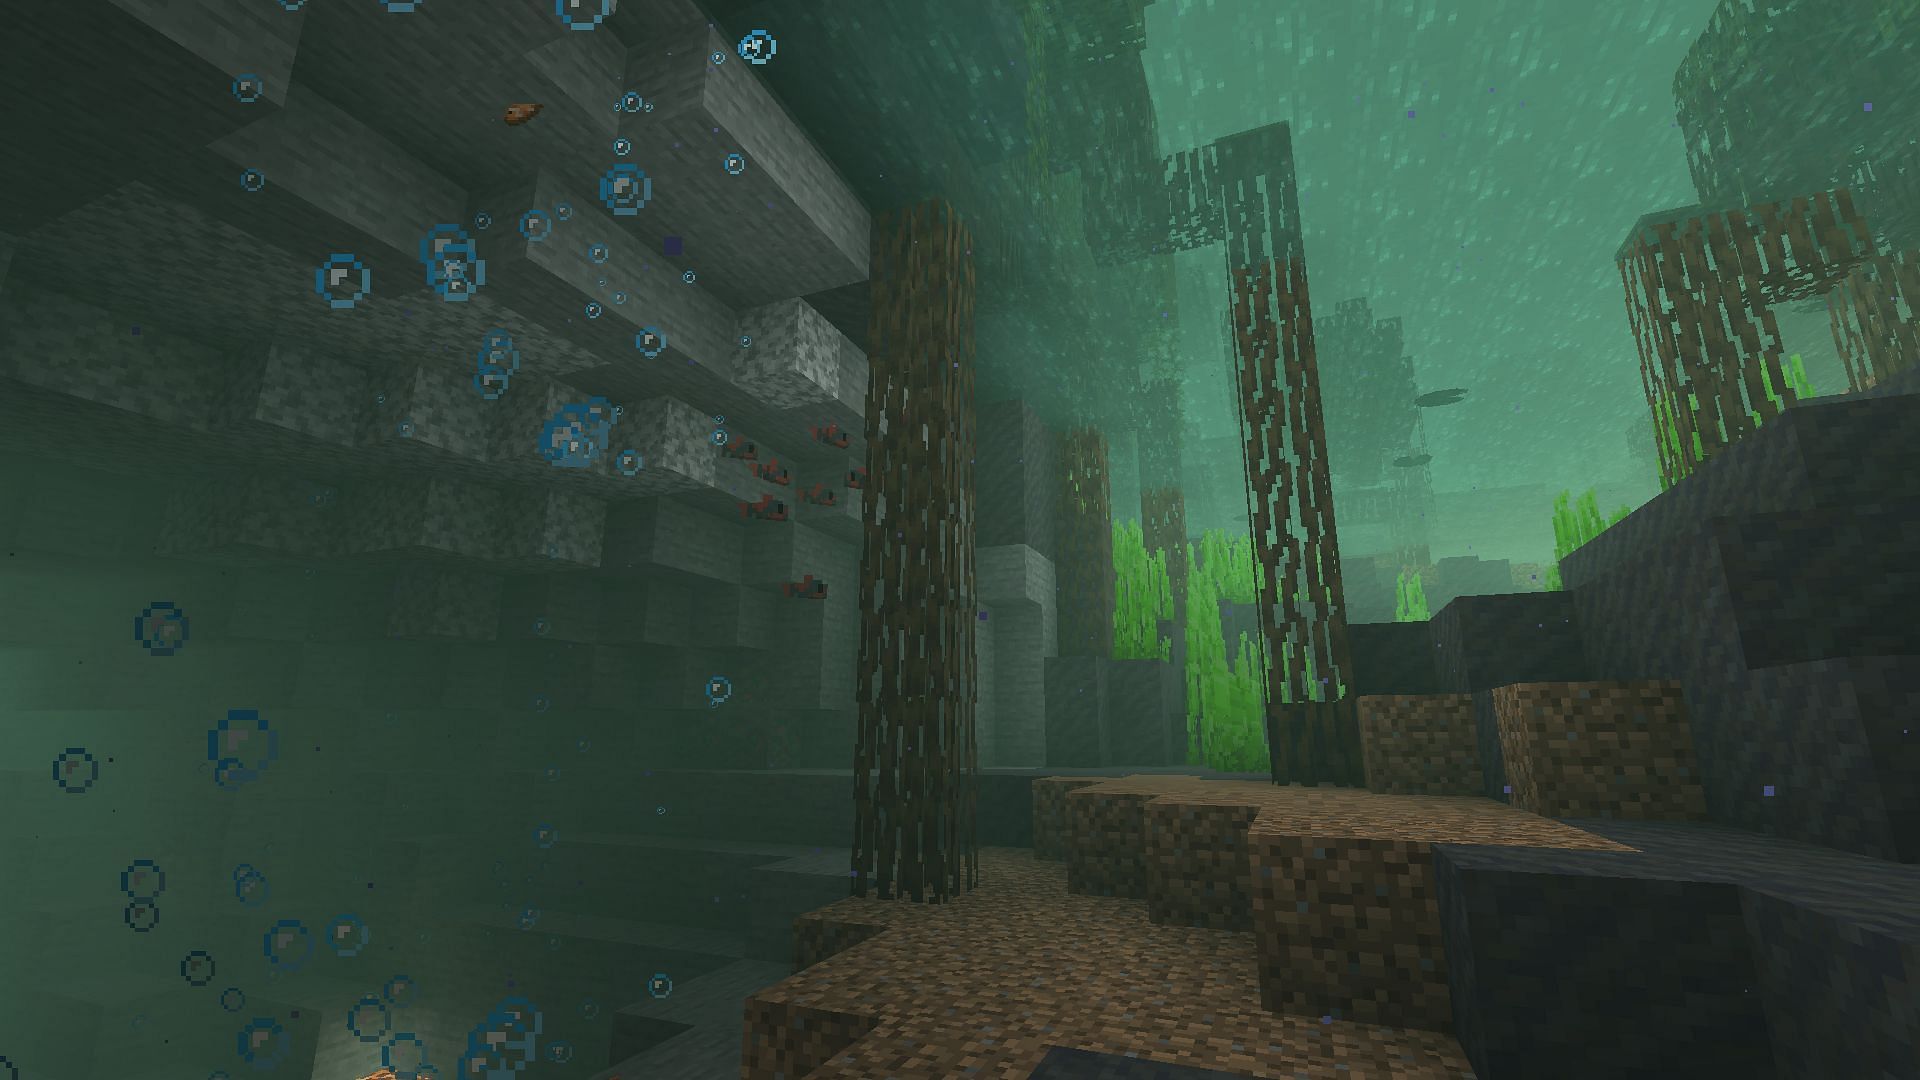 Tropical fish can also be found in the new Mangrove Swamp biome in Minecraft (Image via Mojang)